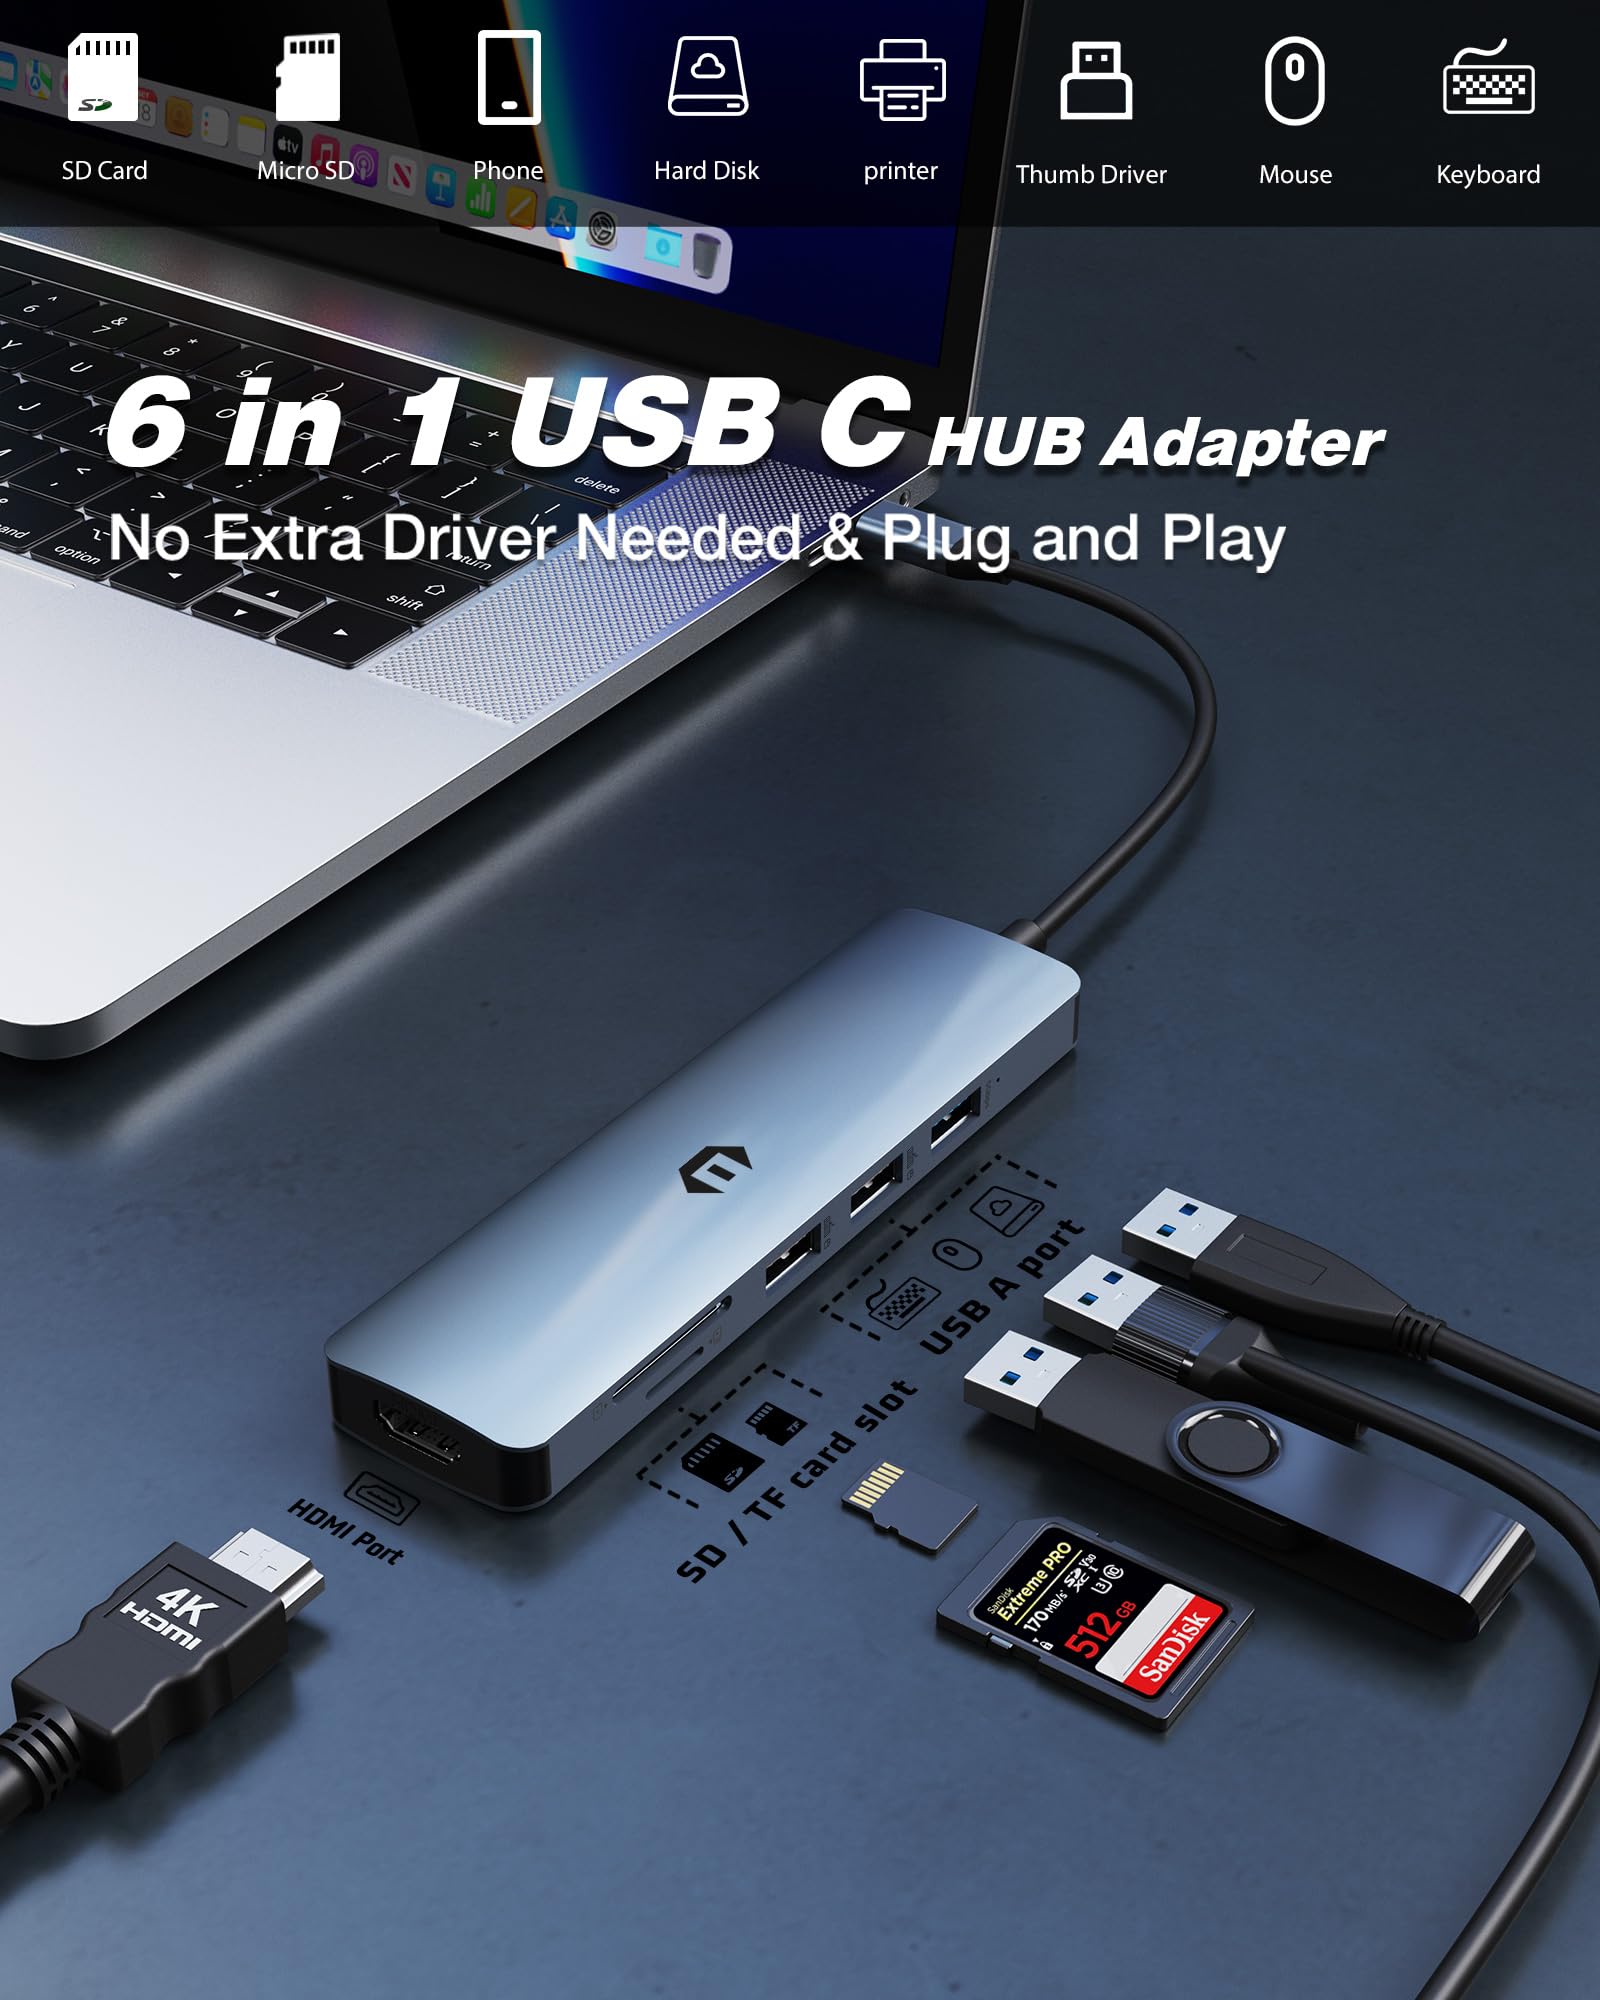 oditton USB C HUB, 6 in 1 USB C Adapter Featuring USB 3.0, 4K HDMI, 2 x USB 2.0, SD/TF Card Reader, Docking Station for Mac Pro/Air Laptops and Beyond